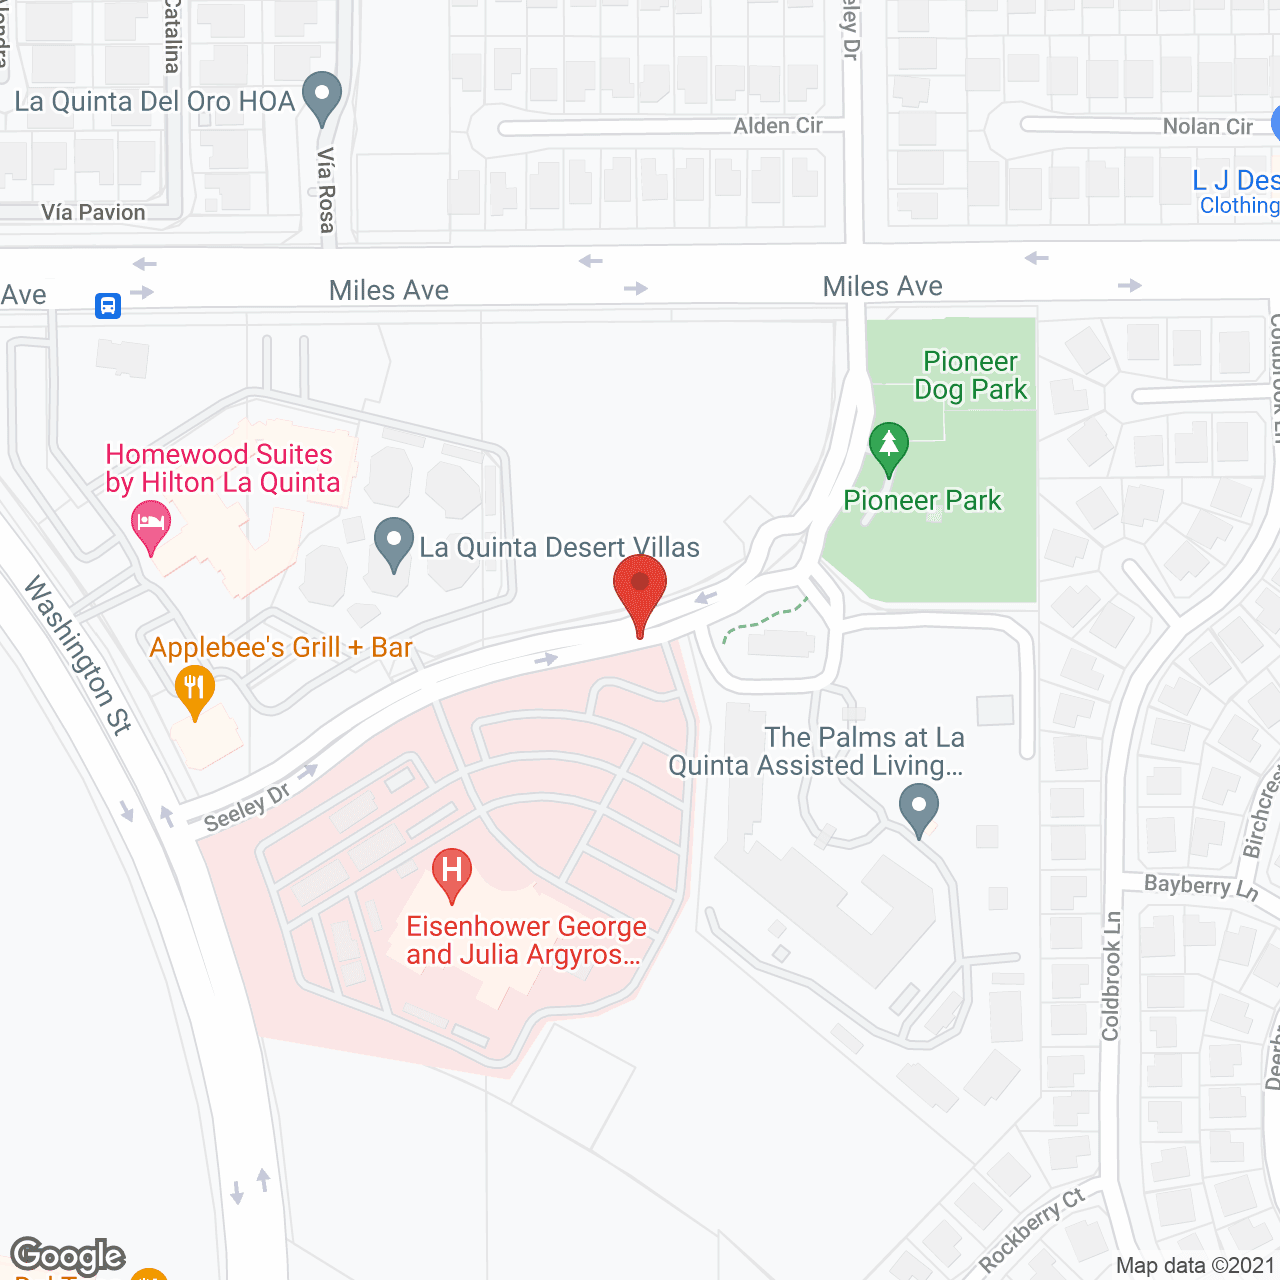 The Palms at La Quinta in google map